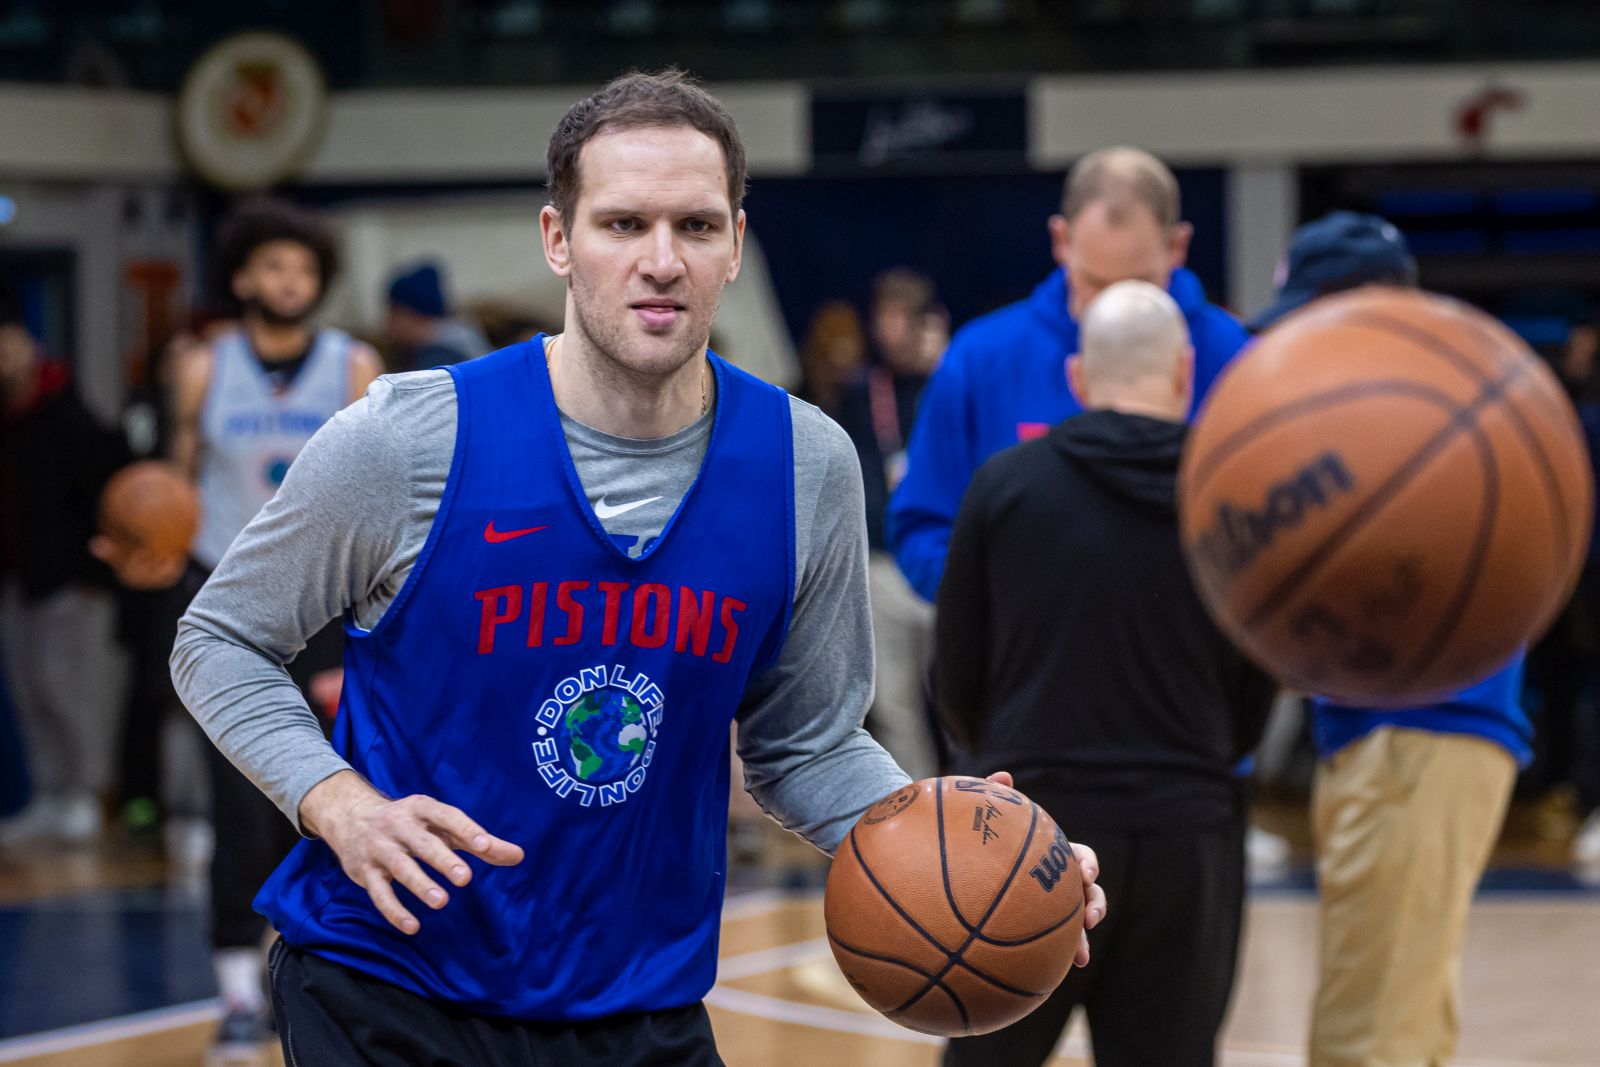 epa10413687 Bojan Bogdanovic of the Detroit Pistons attends a training session in Levallois-Perret, near Paris, France, 18 January 2023. The Pistons are in Paris for an NBA basketball game against the Chicago Bulls on 19 January 2023.  EPA/CHRISTOPHE PETIT TESSON  SHUTTERSTOCK OUT